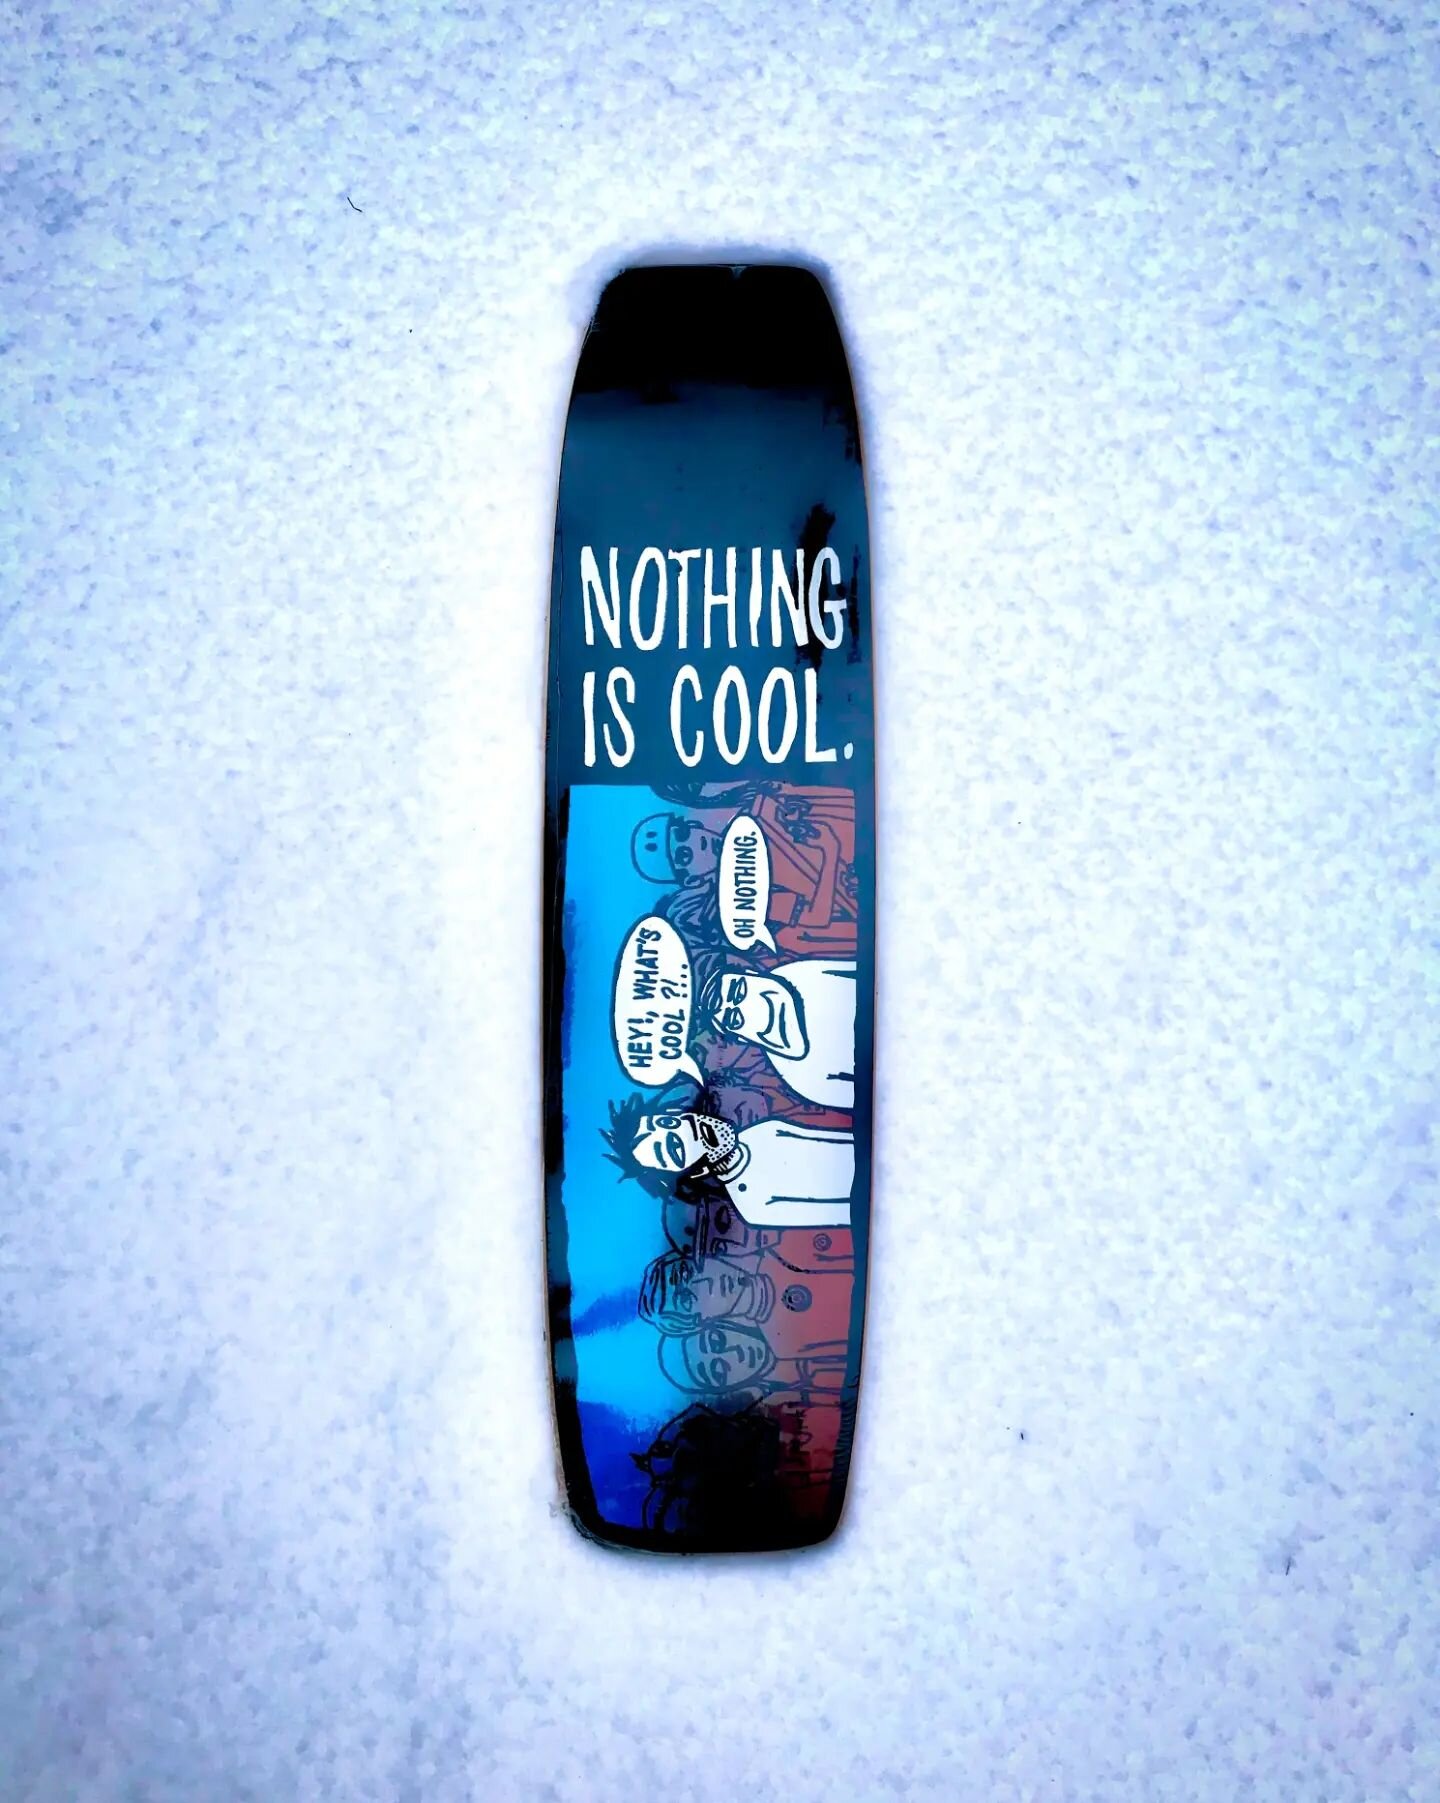 Nothing is Cool when it's this cold 🥶...

Aside from this handsome Plank!

Slide down the hill before mounting your trucks and wheels 🏂

Limited snow and quantities available

Link in bio 🔗